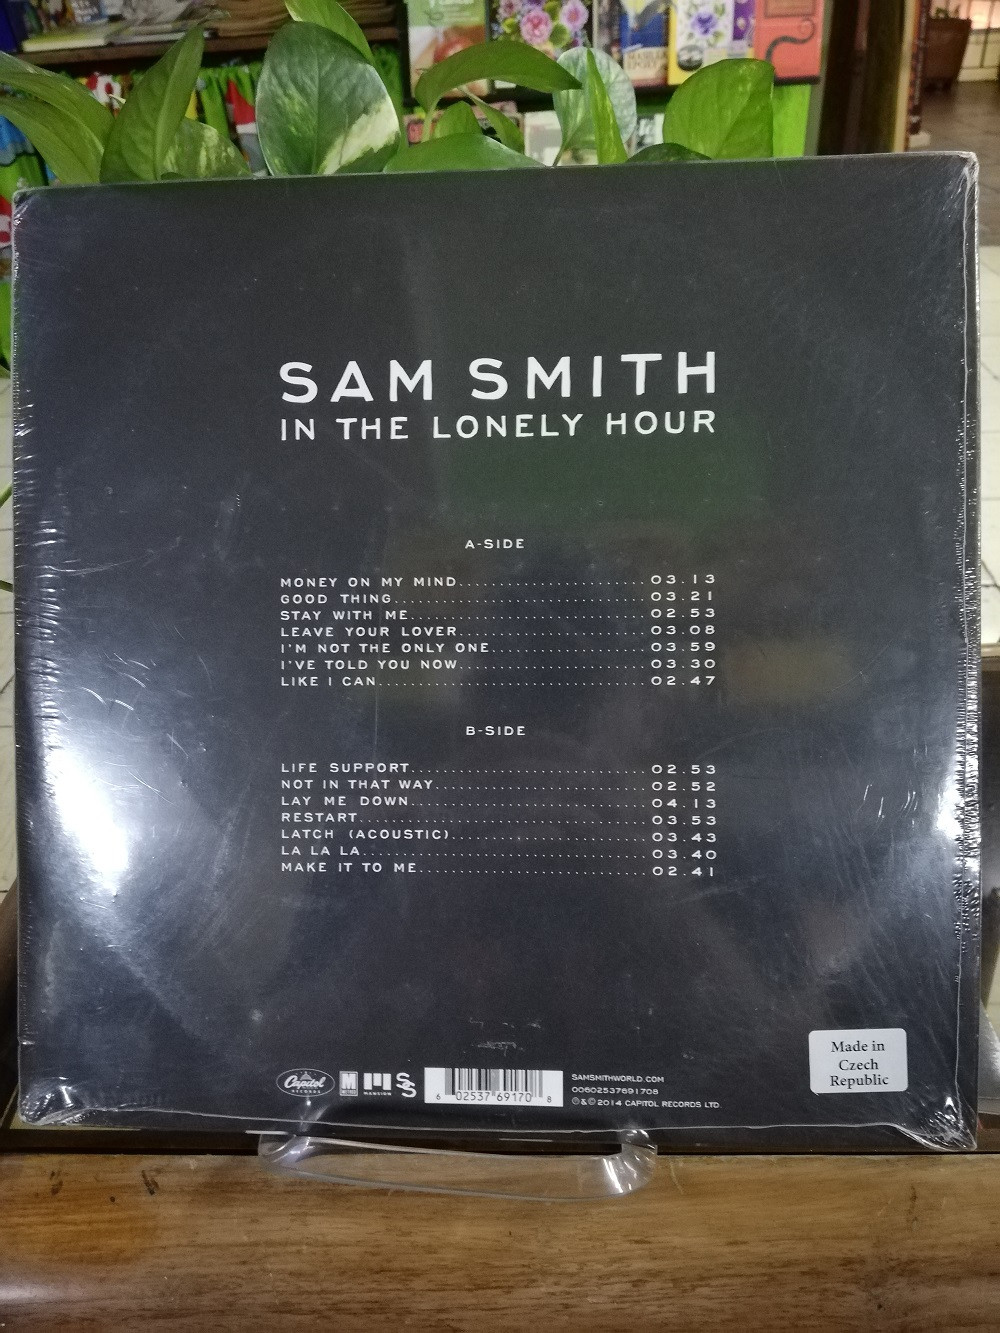 Imagen LP NUEVO SAM SMITH - IN THE LONELY HOUR 2